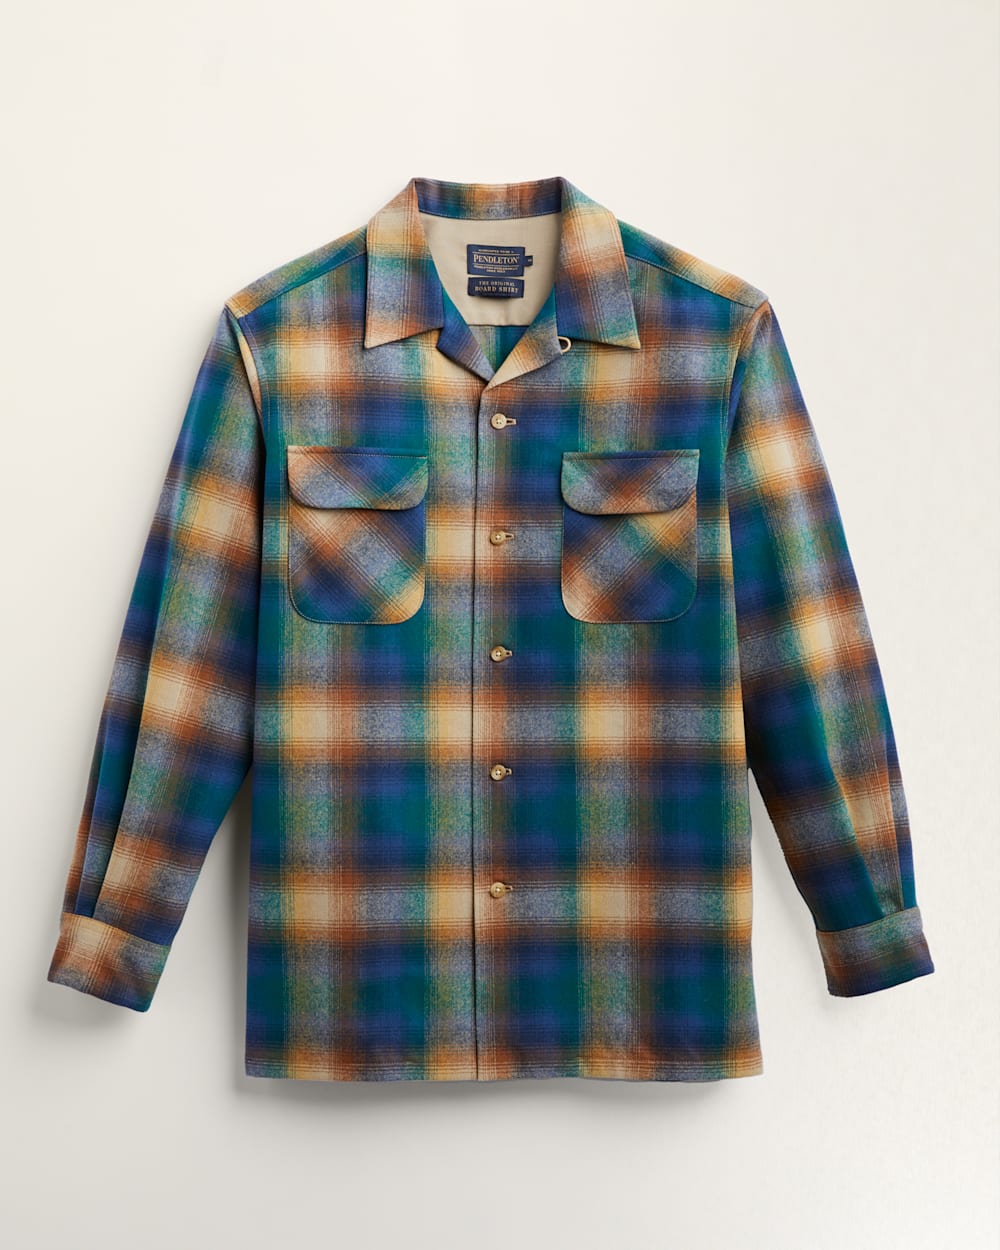 MEN'S PLAID BOARD SHIRT IN BLUE/BROWN MULTI OMBRE image number 1